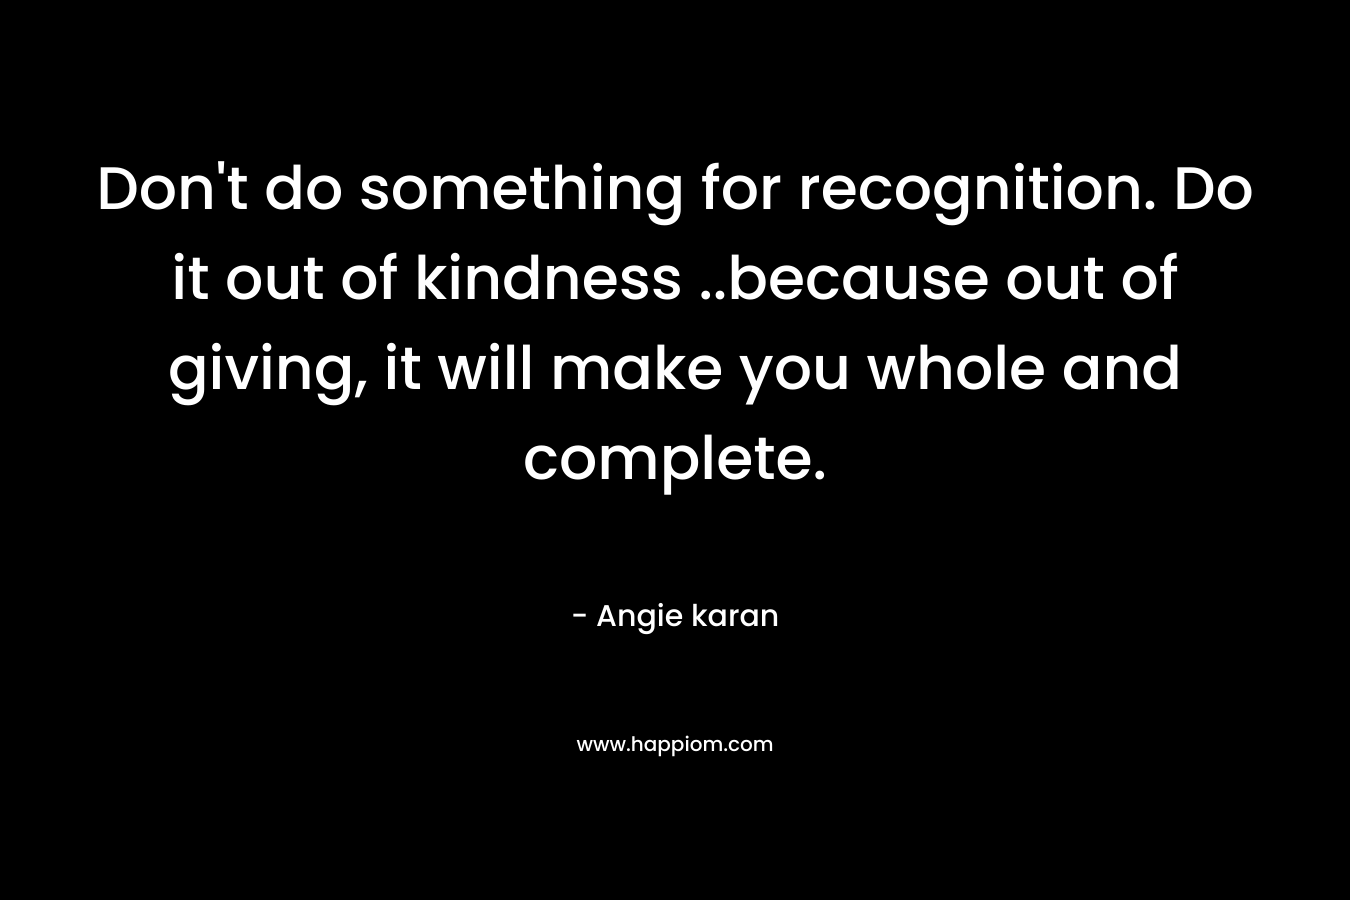 Don't do something for recognition. Do it out of kindness ..because out of giving, it will make you whole and complete.